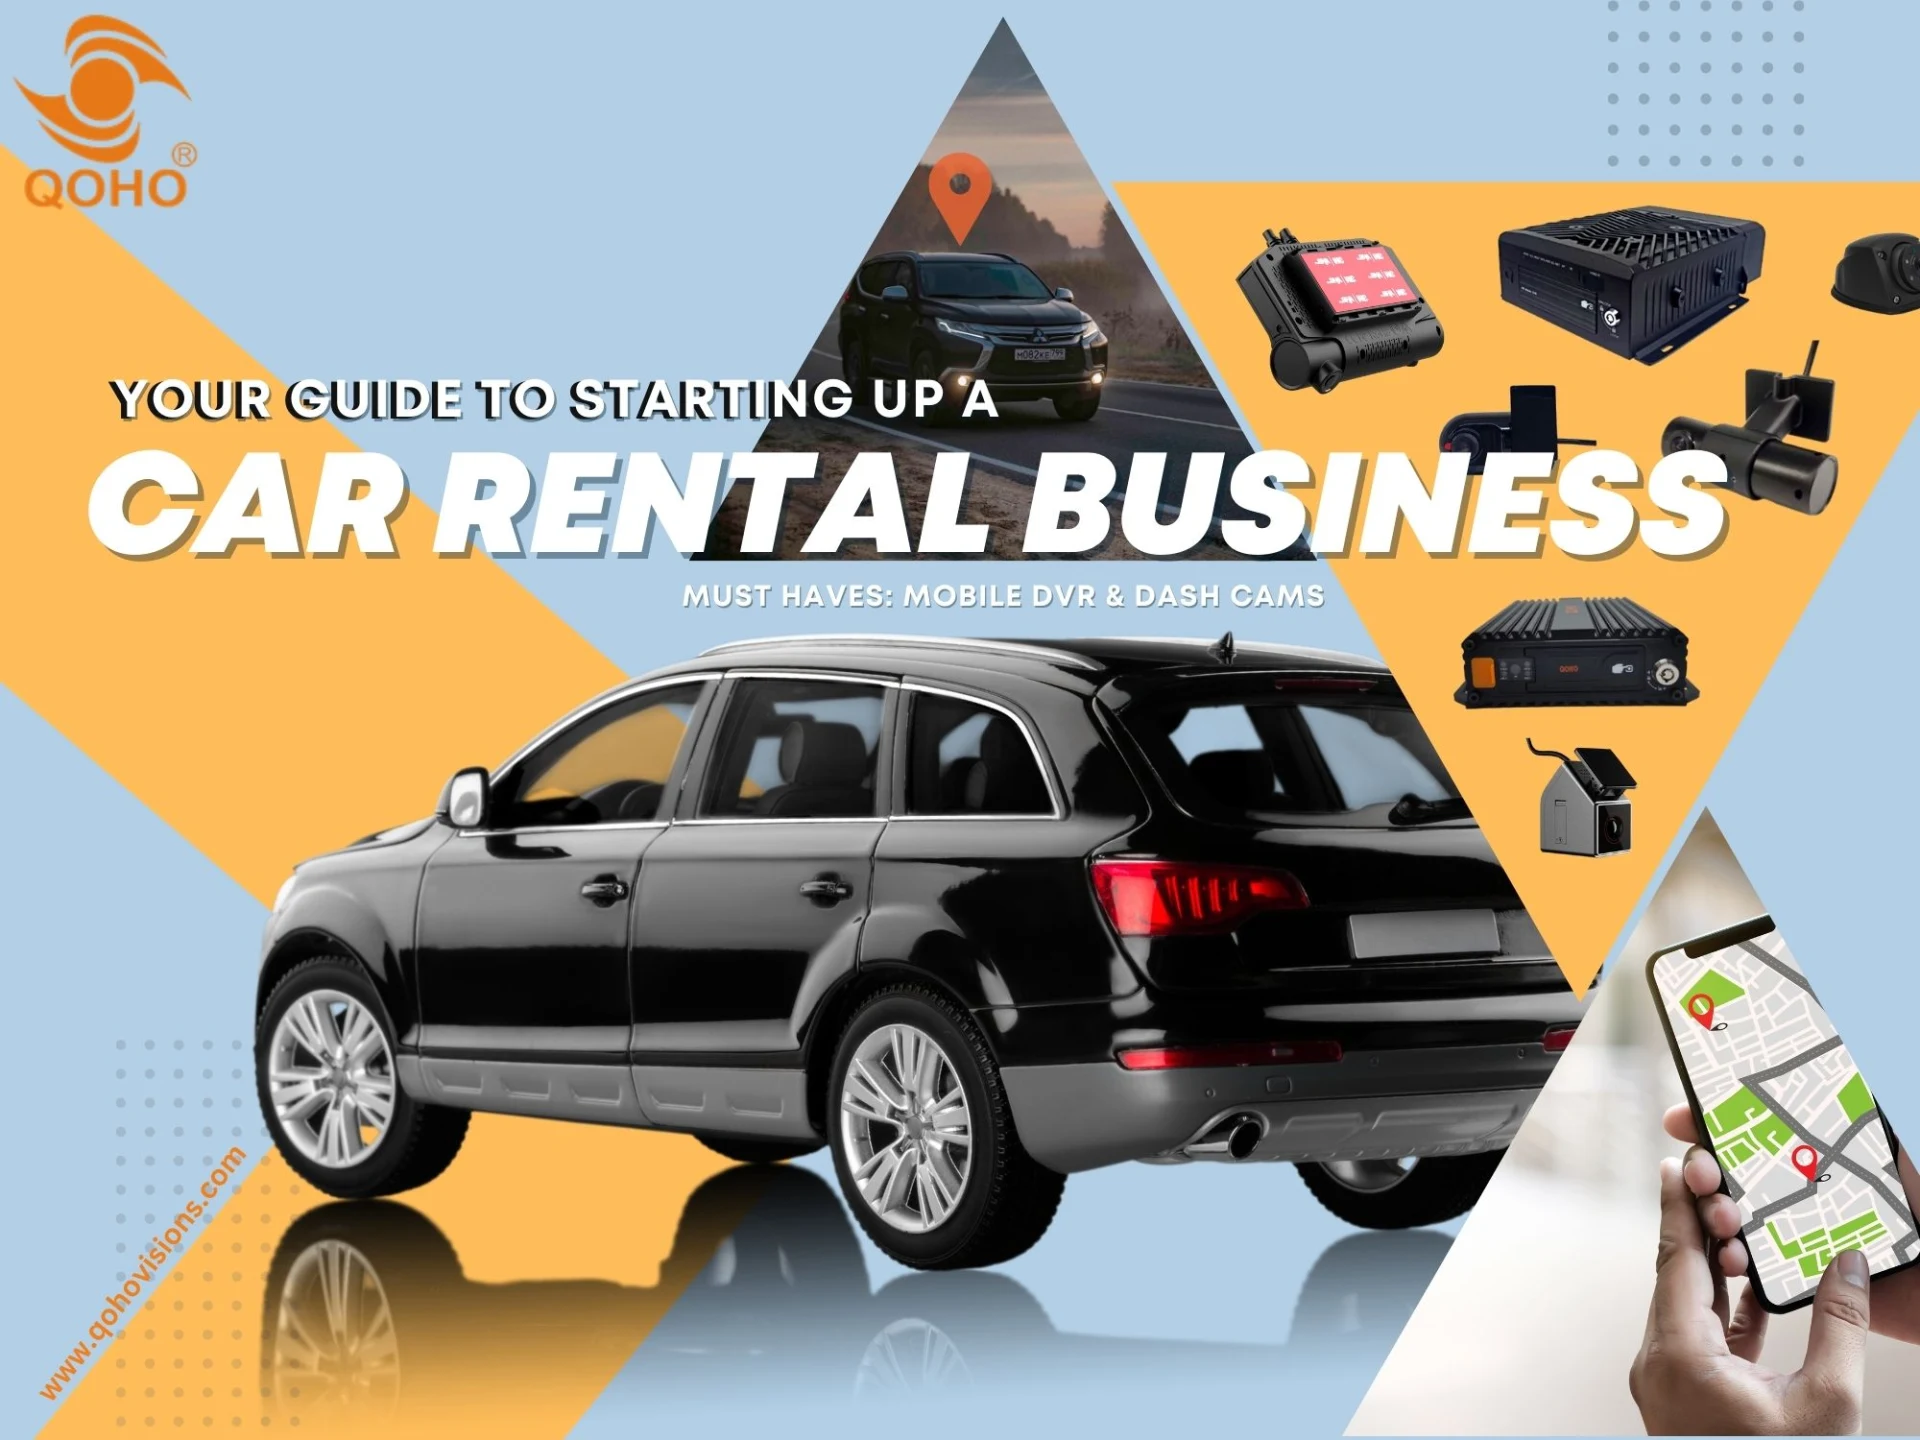 Here are 5 Car Rental Business Tips!